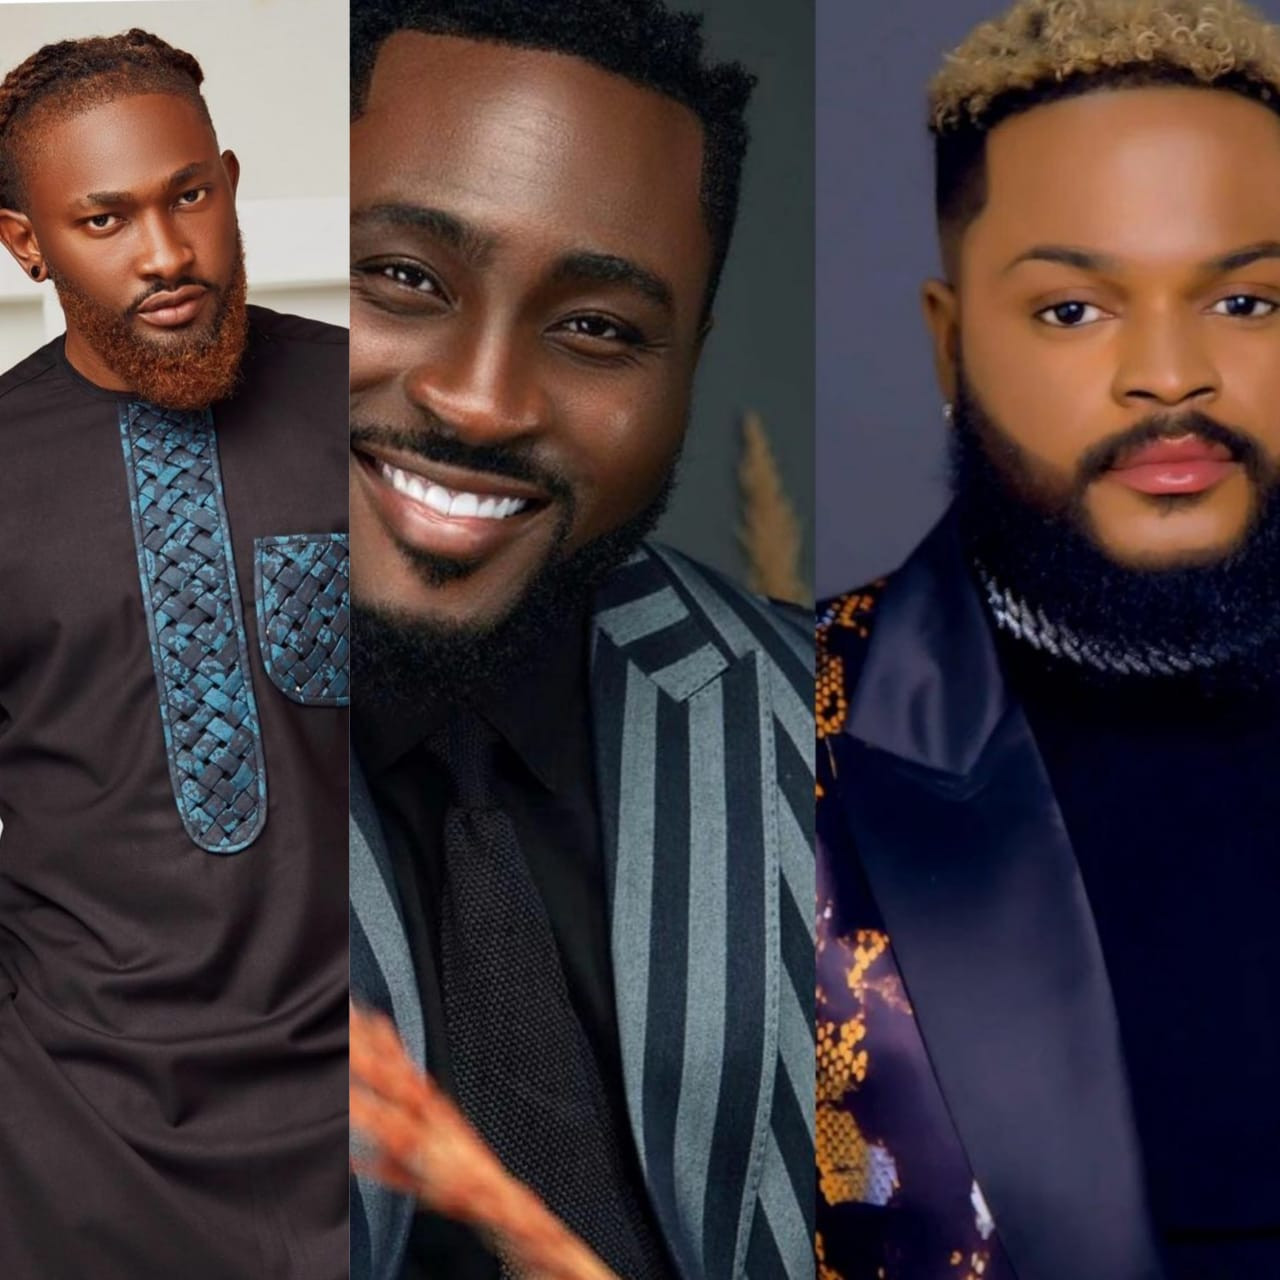 #BBNaija: Bullying is totally unacceptable - Uti Nwachukwu reacts to Pere and WhiteMoney